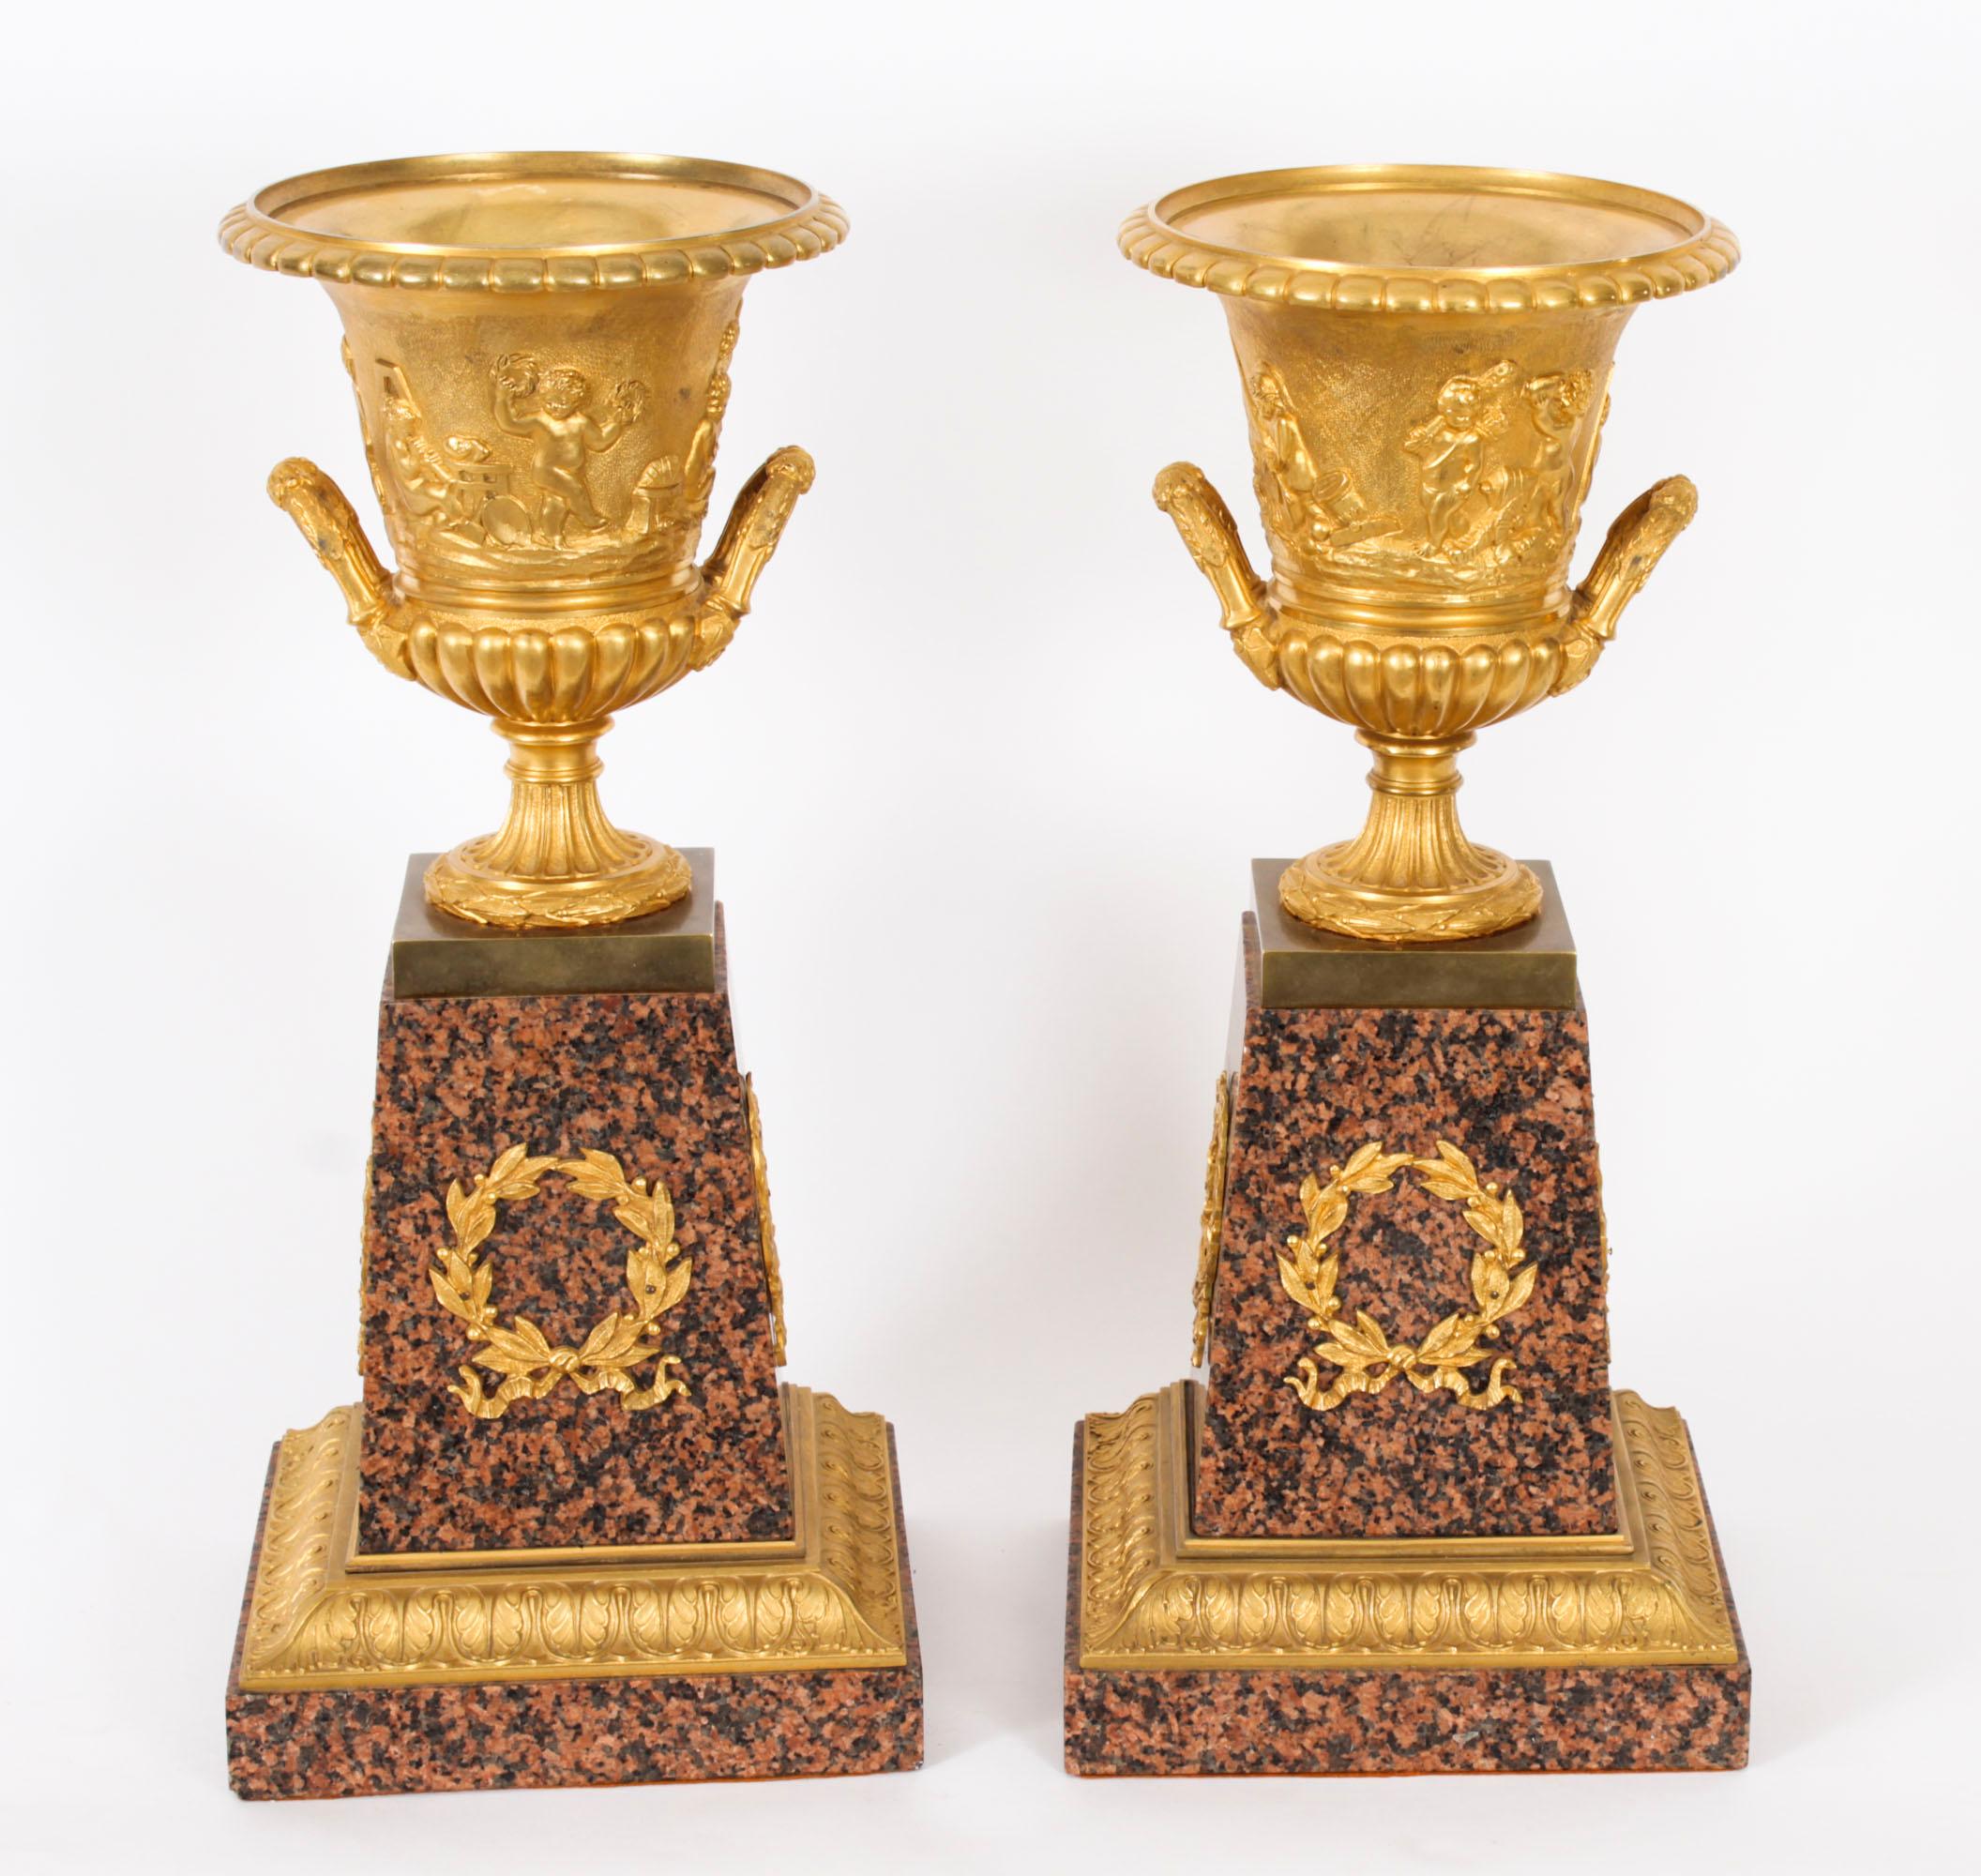 Antique Pair Large 16inch Grand Tour Gilt Bronze Campana Urns Early 20th Century For Sale 6